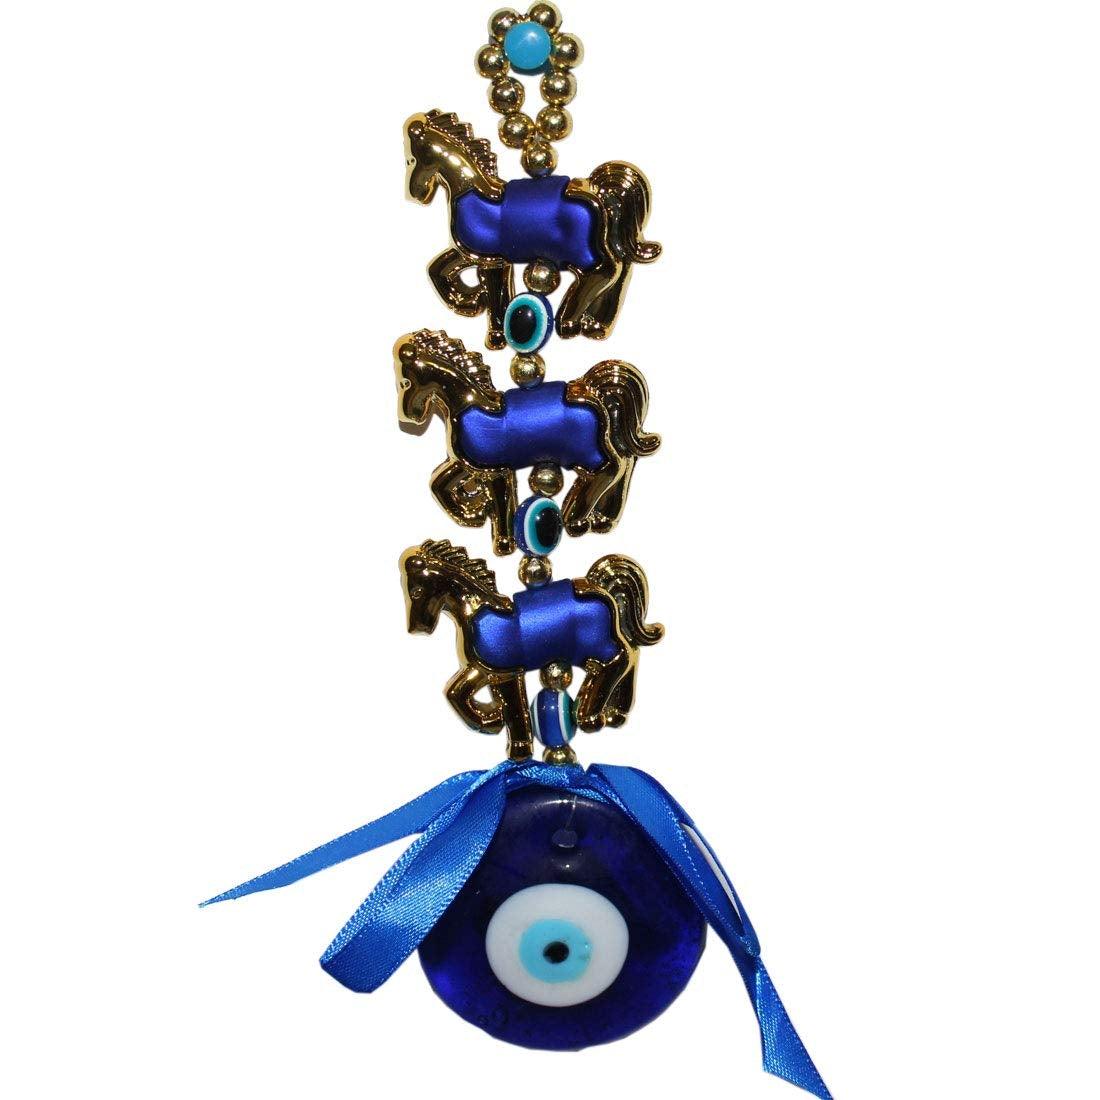 Evil Eye Three Horse Hanging For Good Luck And Prosperity Horse Zodiac vastu feng shui product - GreentouchCrafts